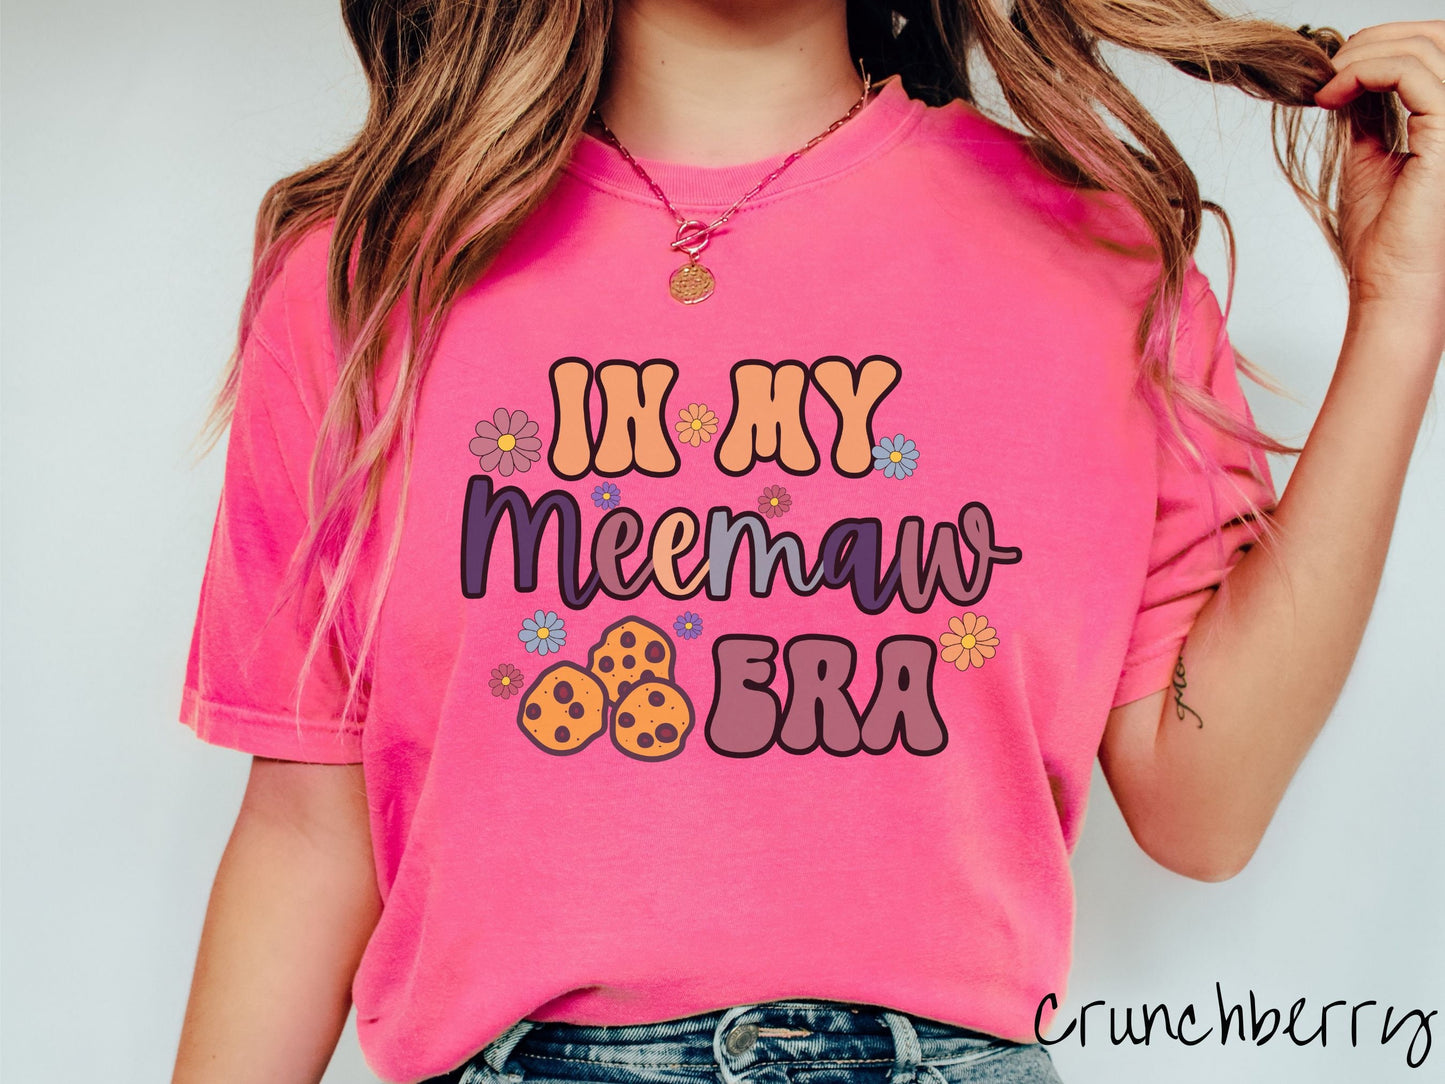 A woman wearing a cute crunchbery colored sweatshirt with text on the front saying In My Meemaw Era, with flowers and chocolate chip cookies mixed within the text.